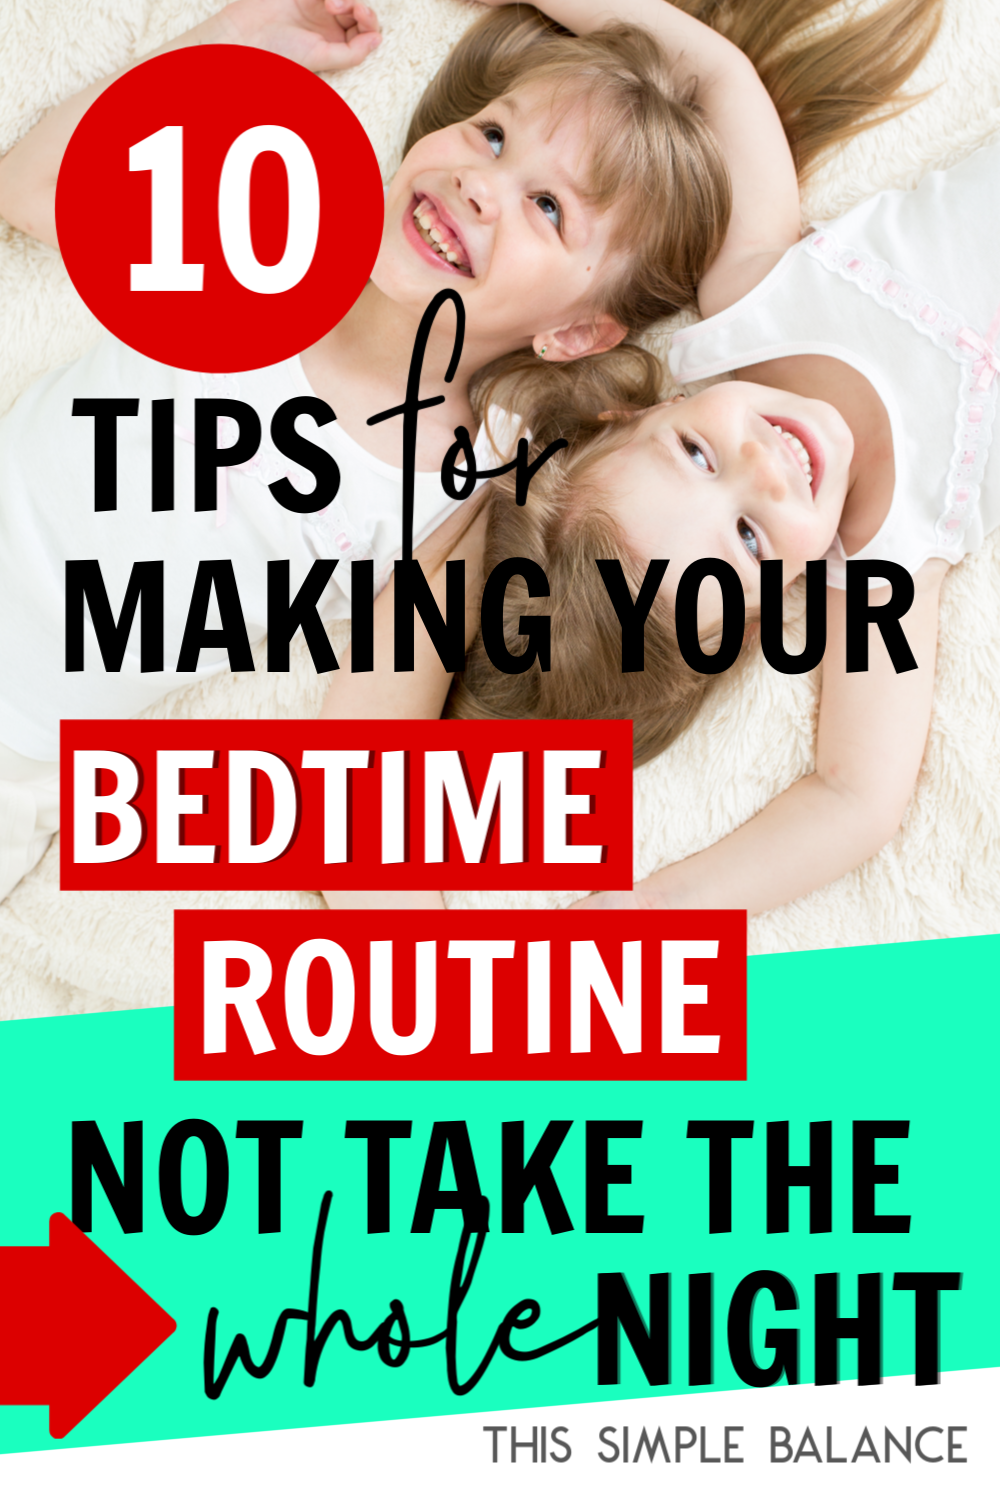 little girls lying on carpet getting ready for bed, with text overlay, "10 tips for making your bedtime routine not take the whole night"